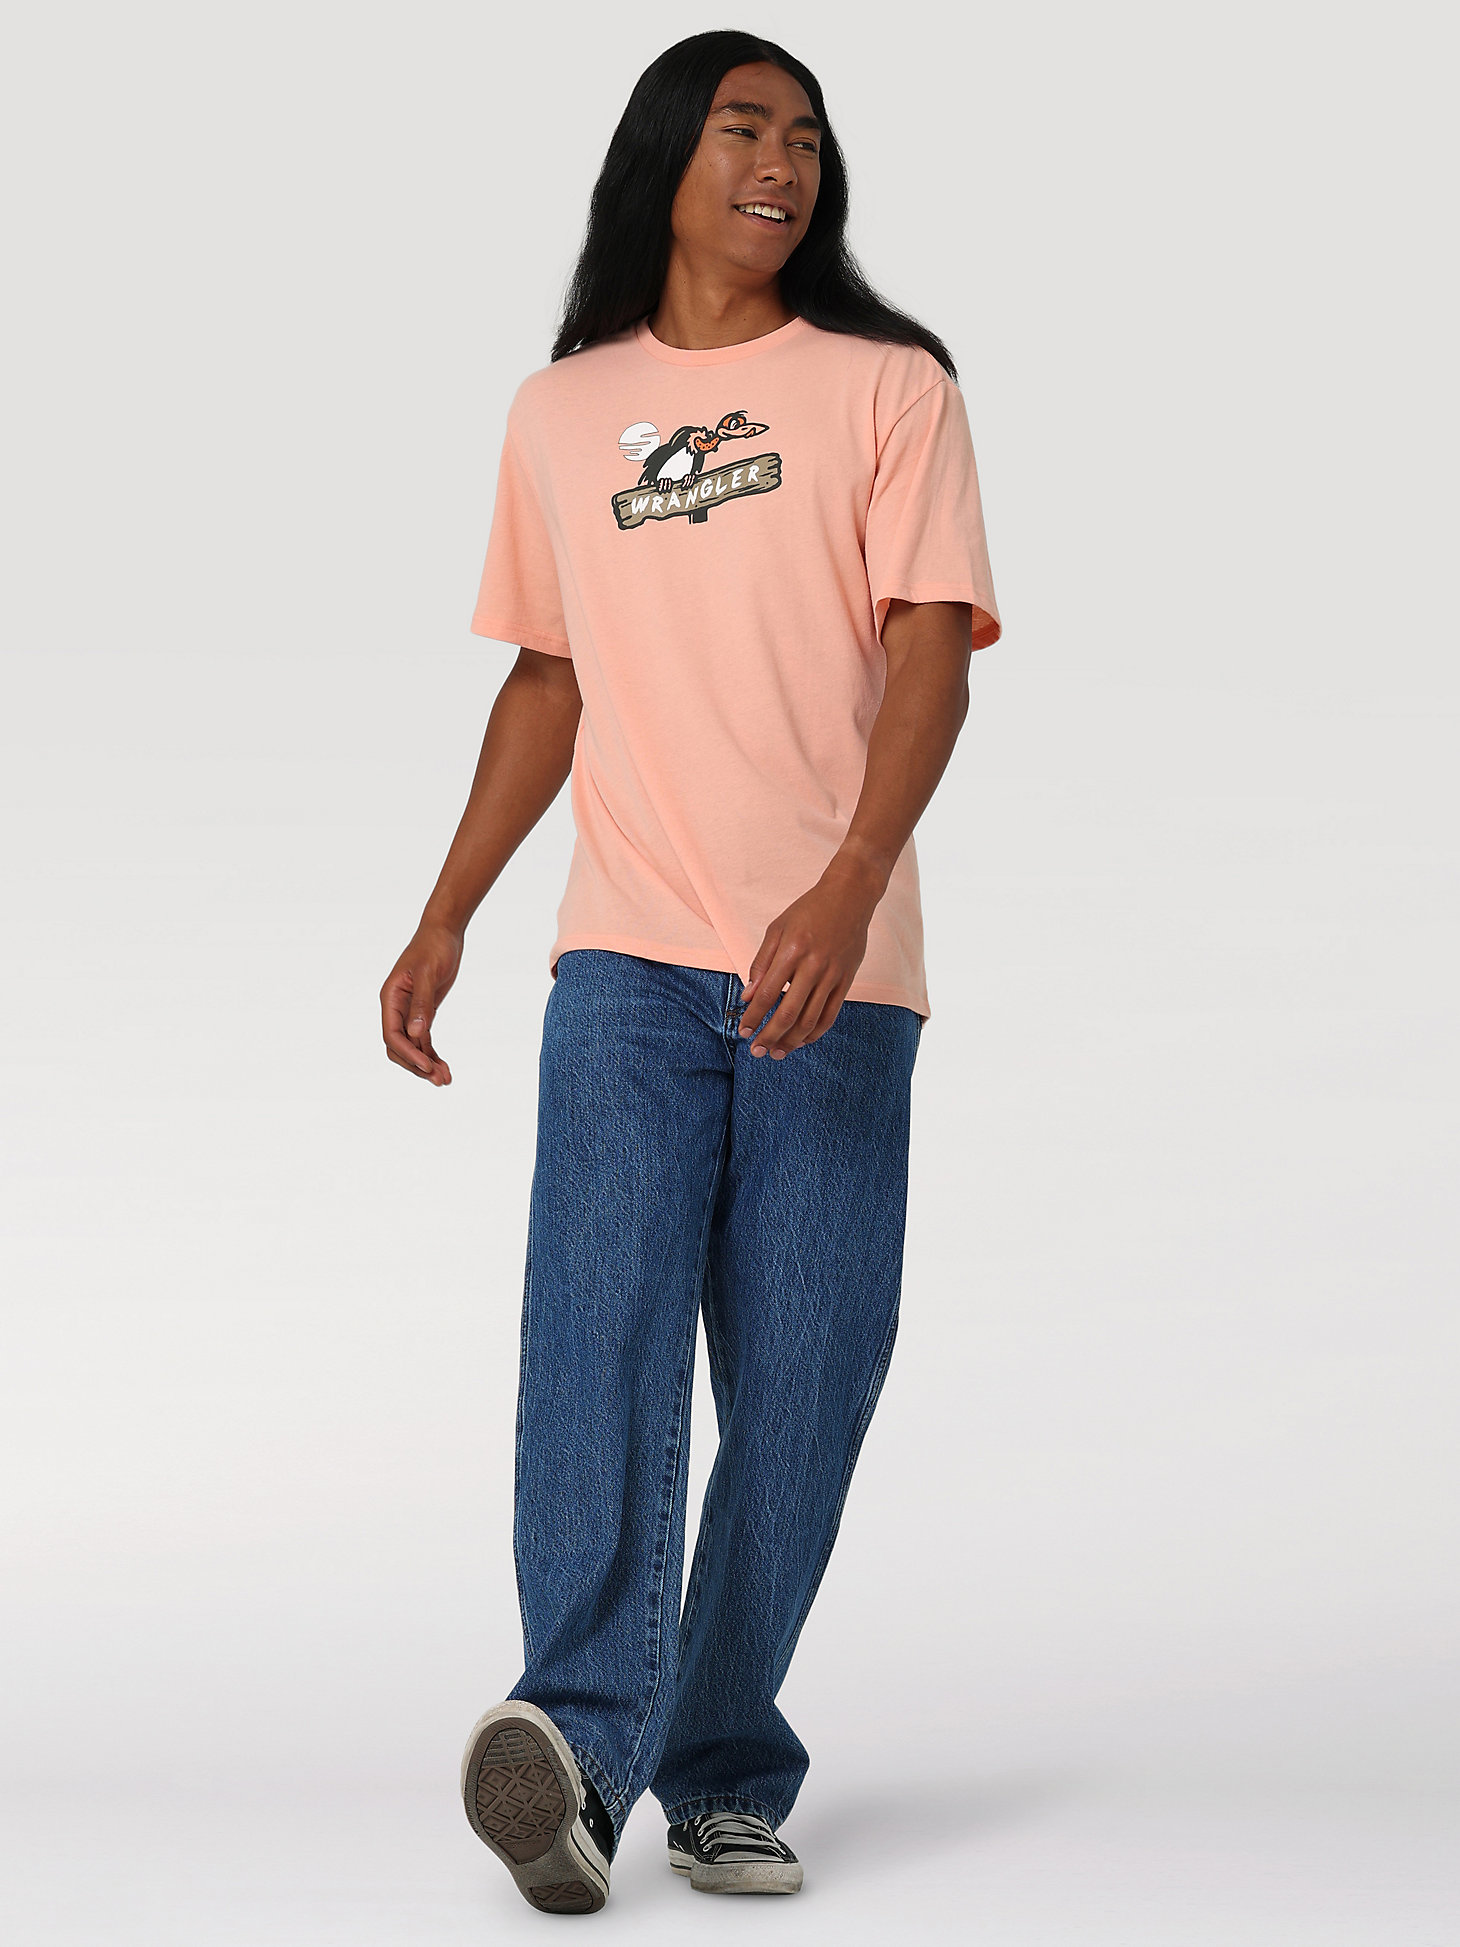 Men's Relaxed Deserted Graphic T-Shirt in Salmon alternative view 4